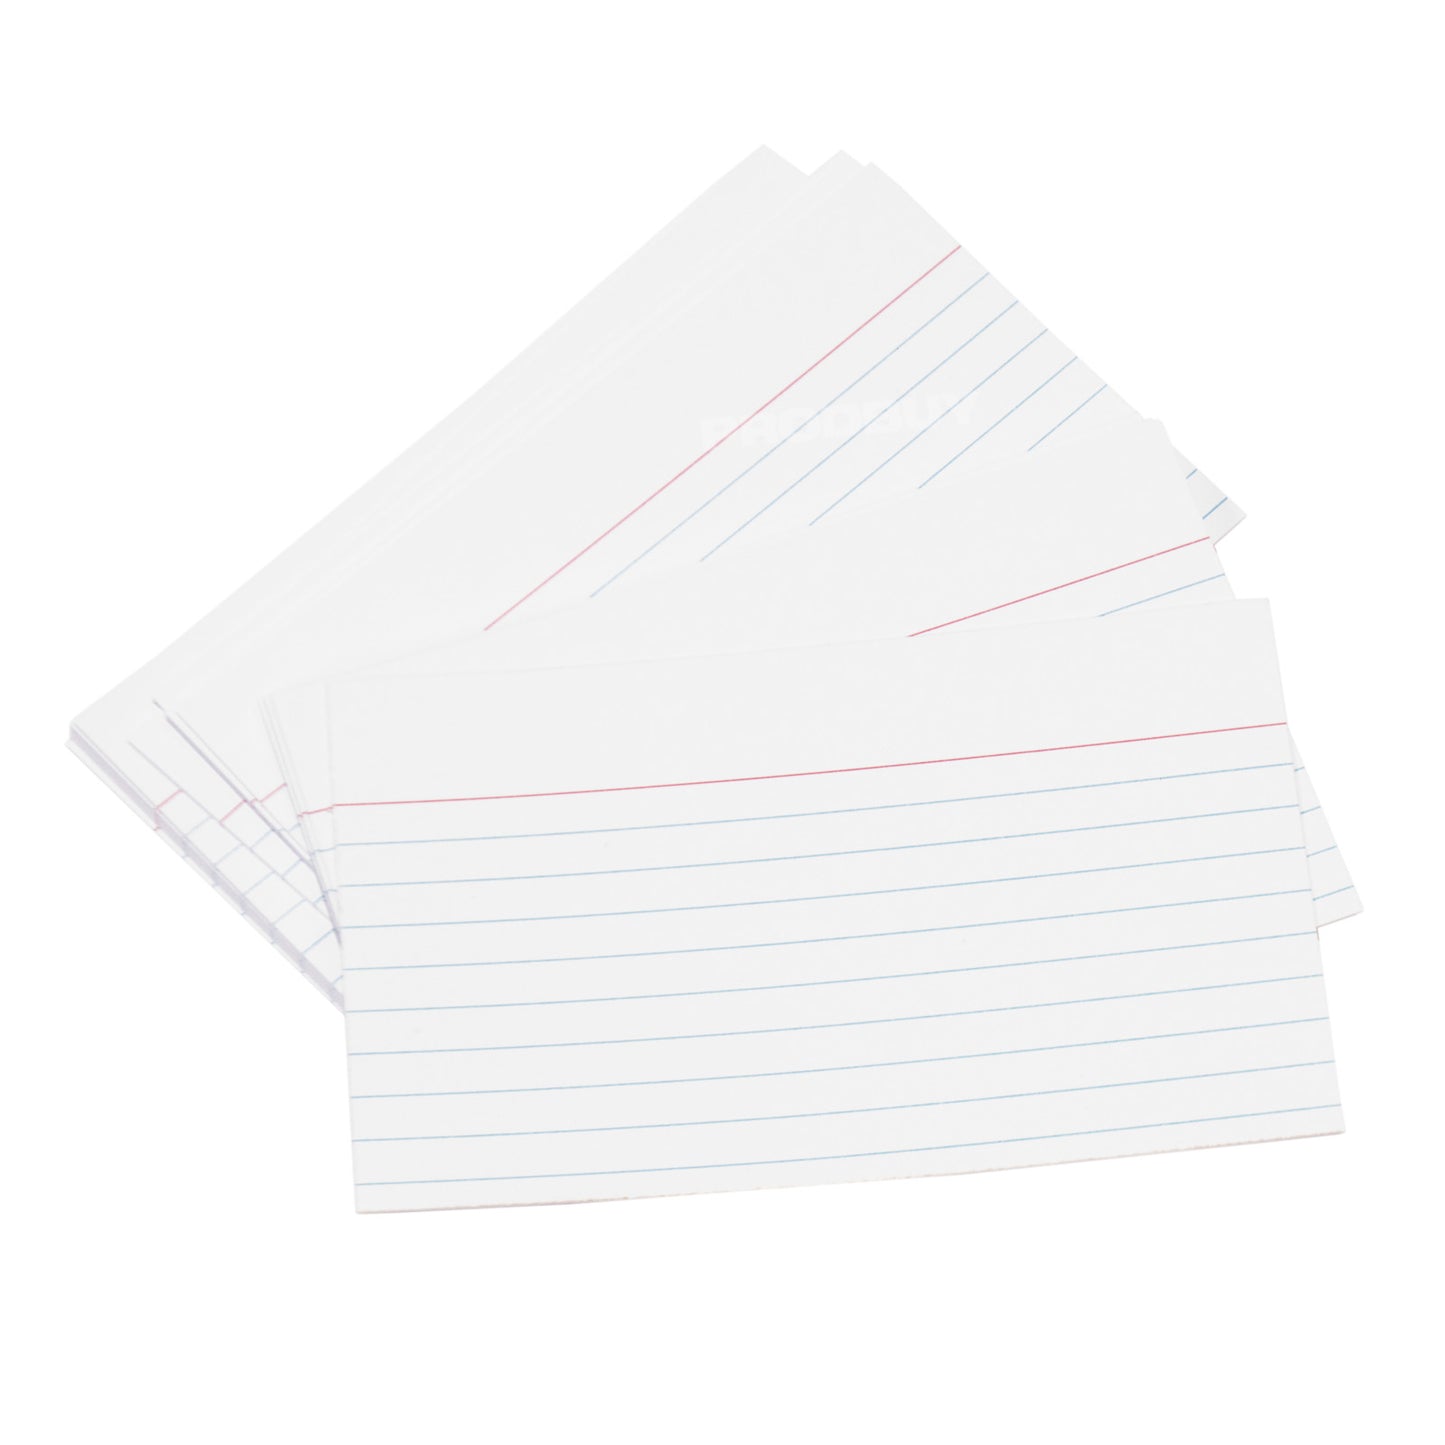 Pack of 1,000 Record Index Cards 5" x 3" Lined White Revision Sheets